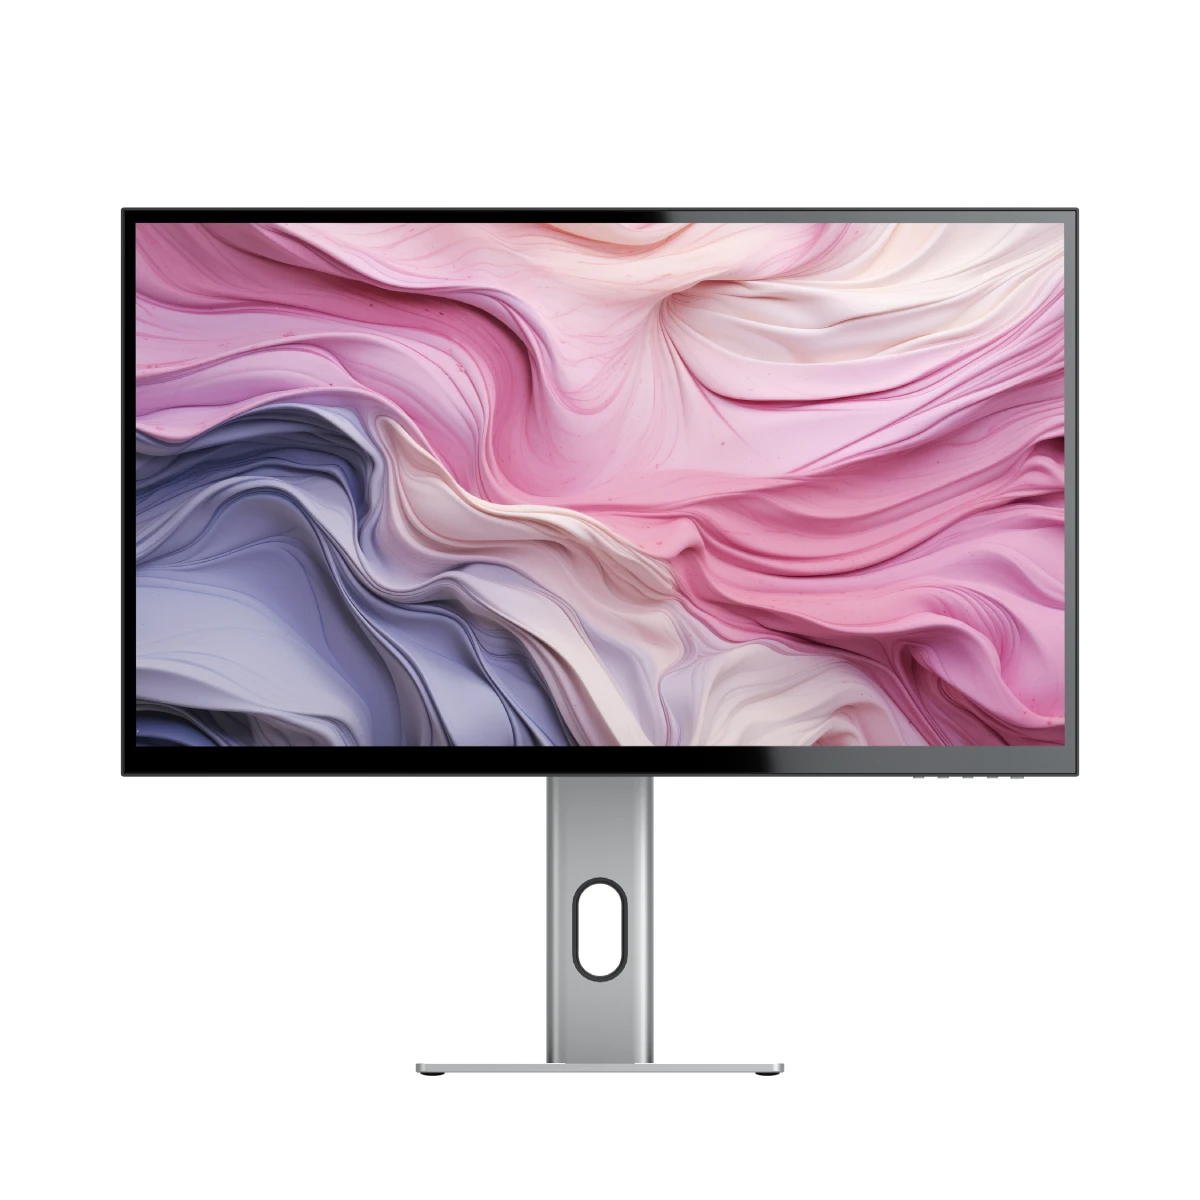 clarity-27-uhd-4k-monitor-pack-of-22